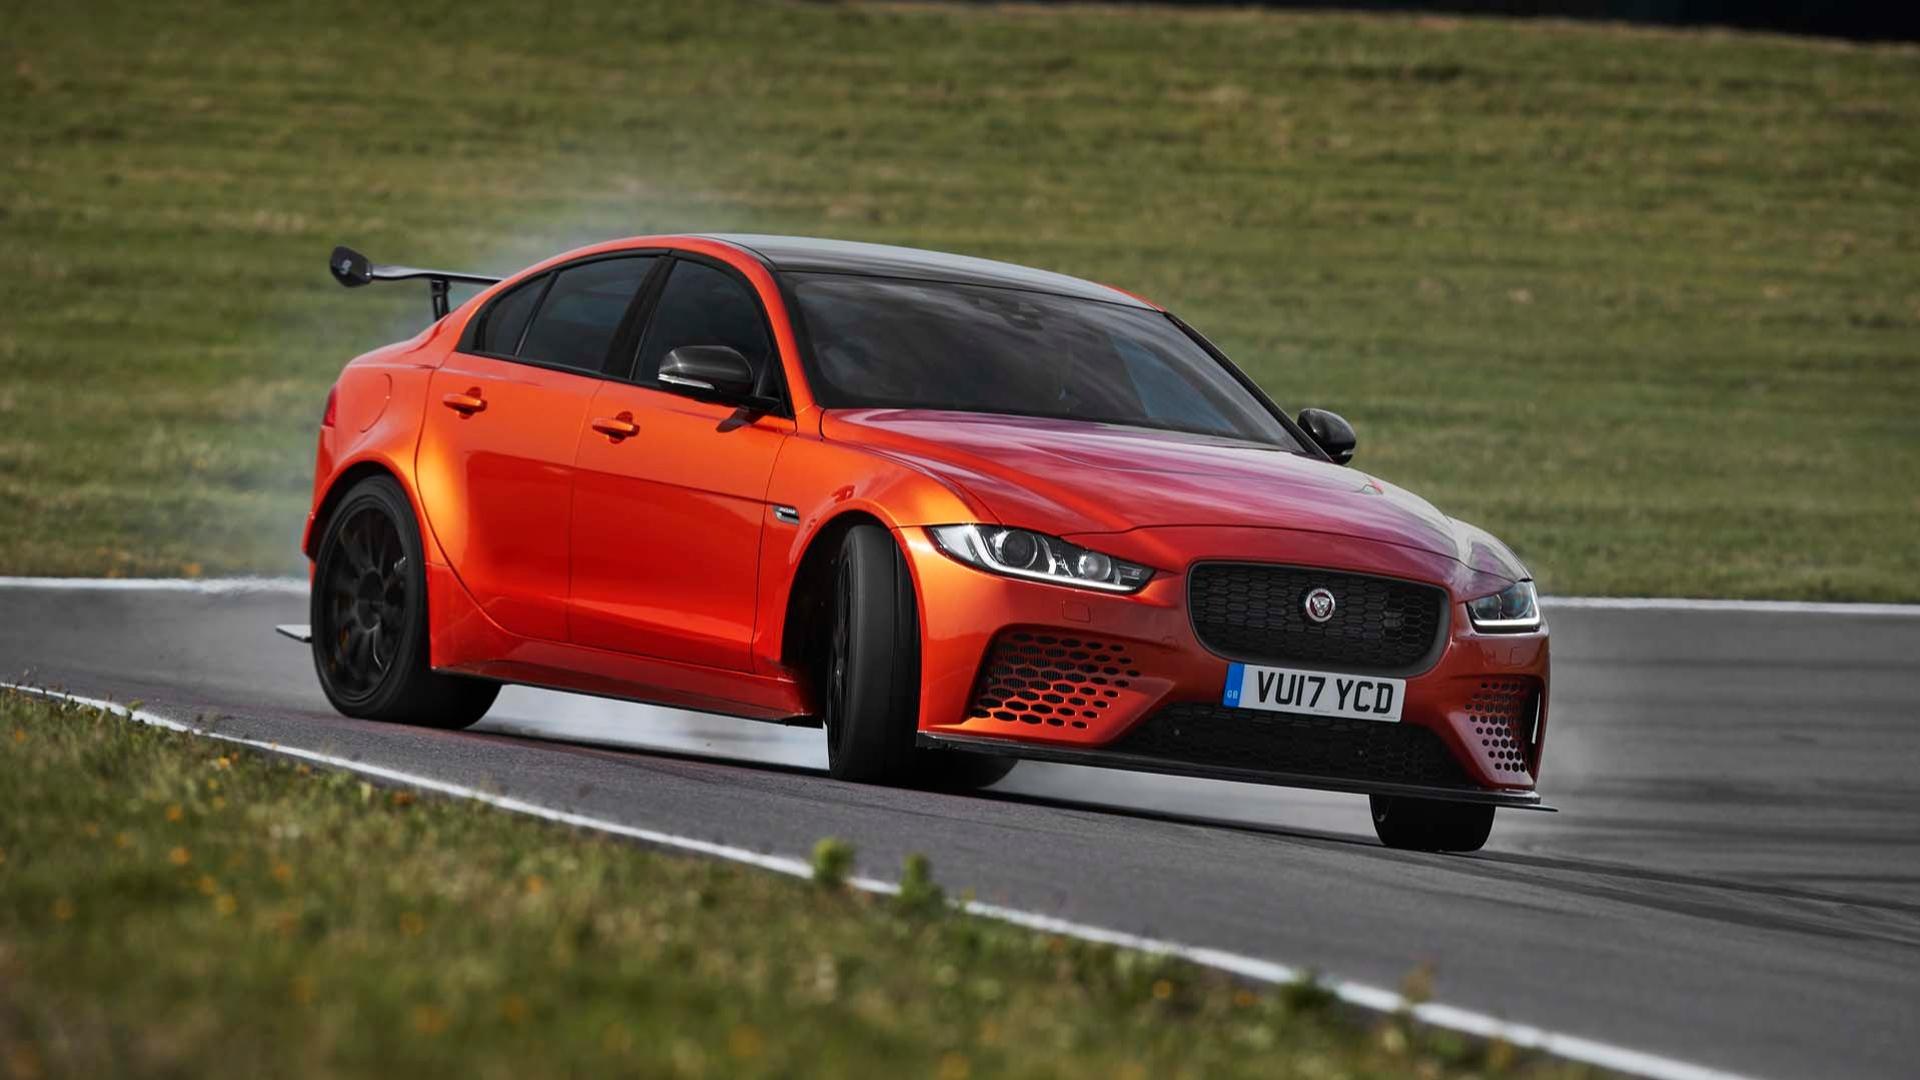 Jaguar XE SV Project 8 Is Here With Wings, Vents, And 592 Horses